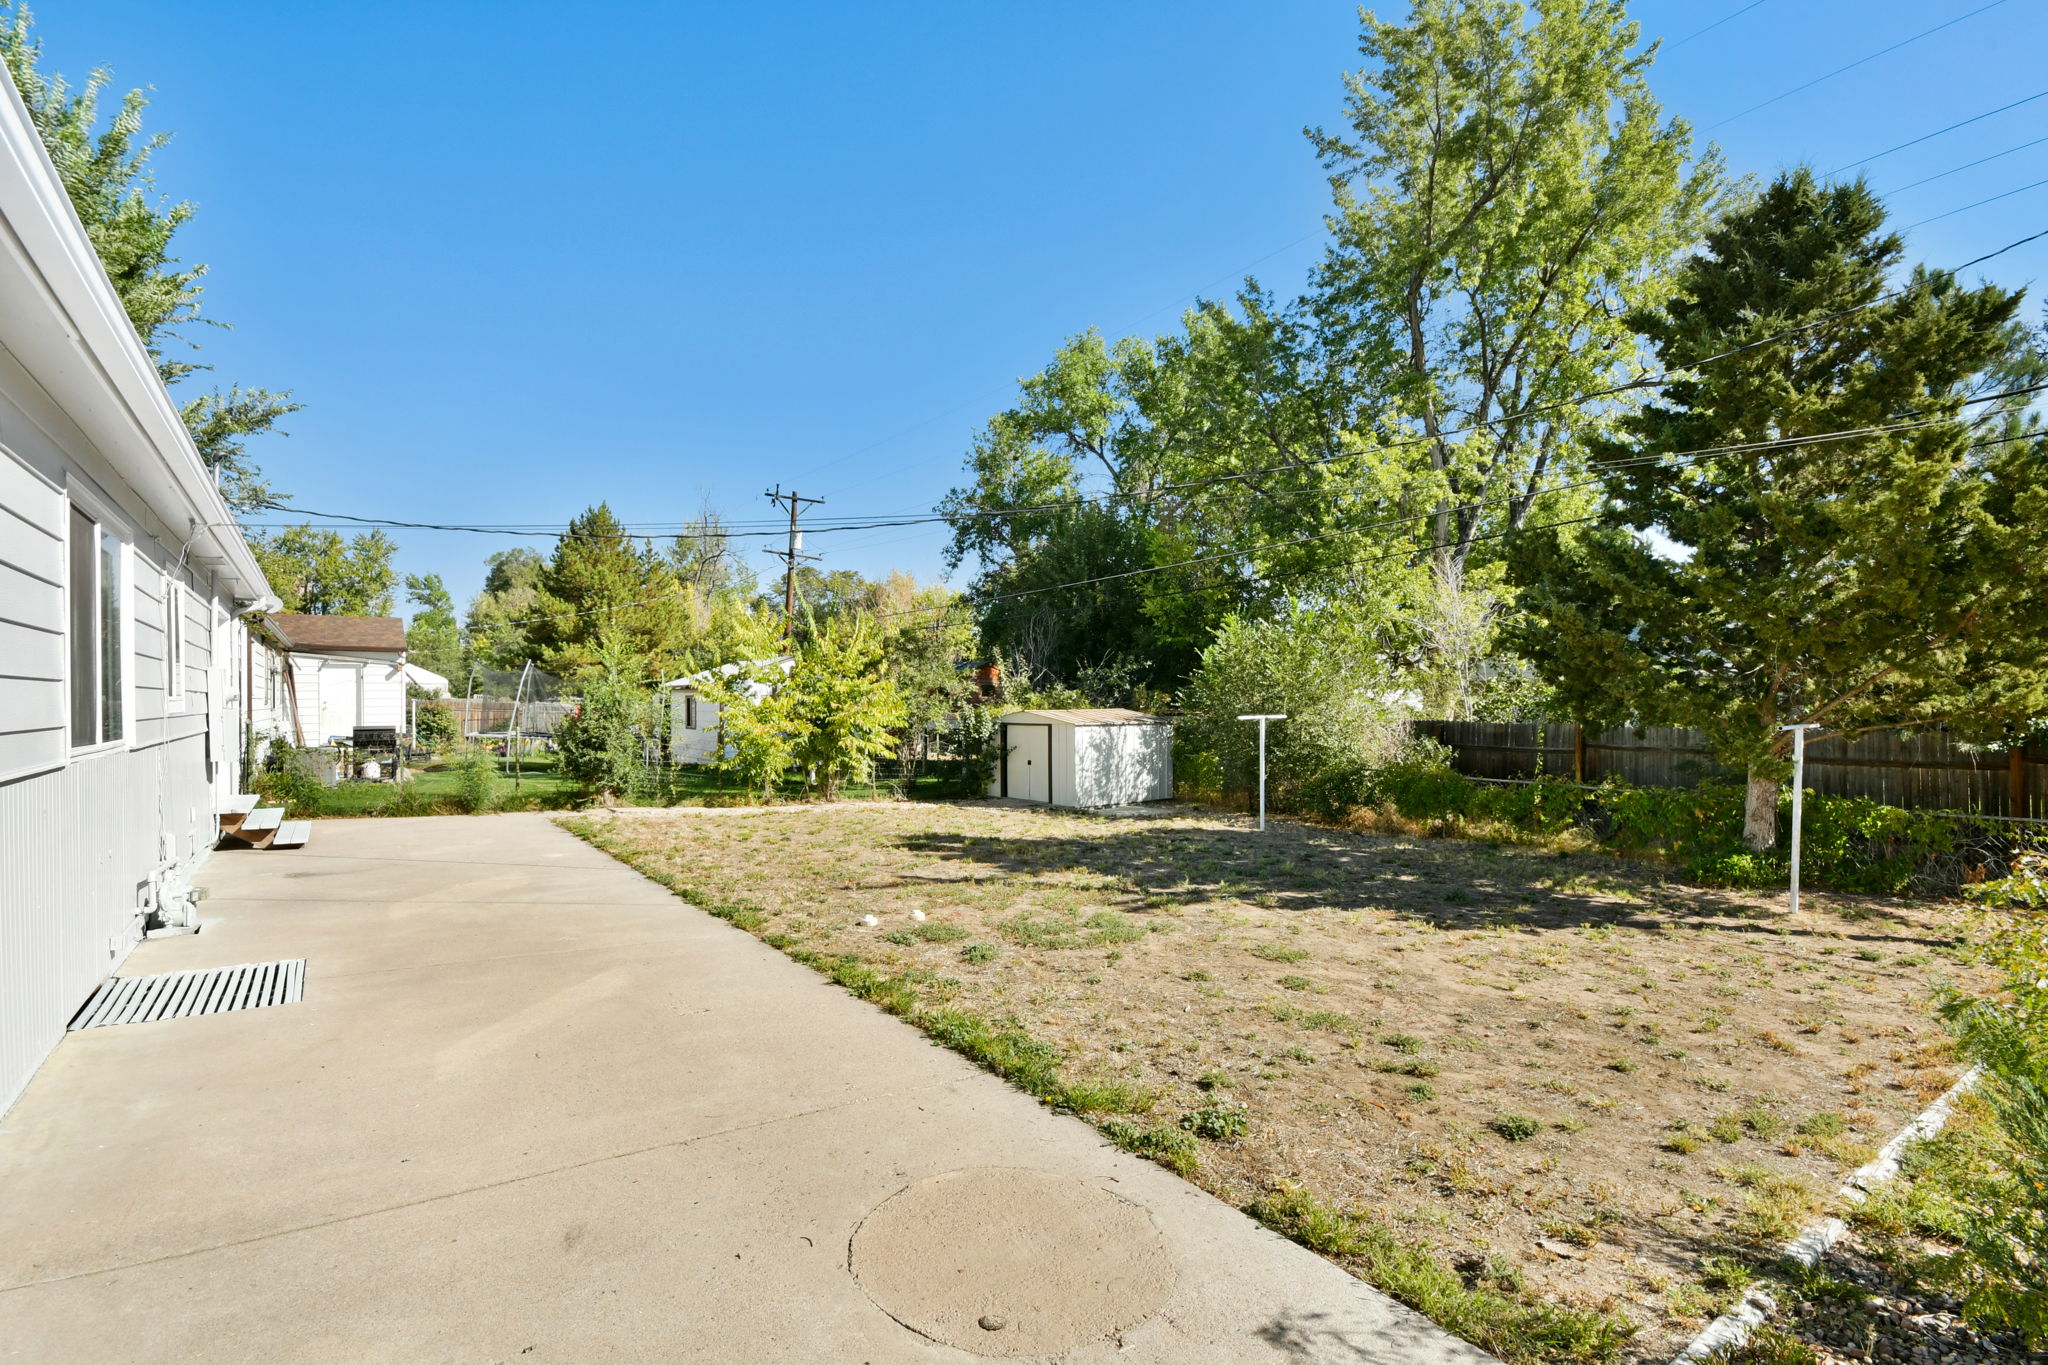  2432 13th Ave, Greeley, CO 80631, US Photo 34